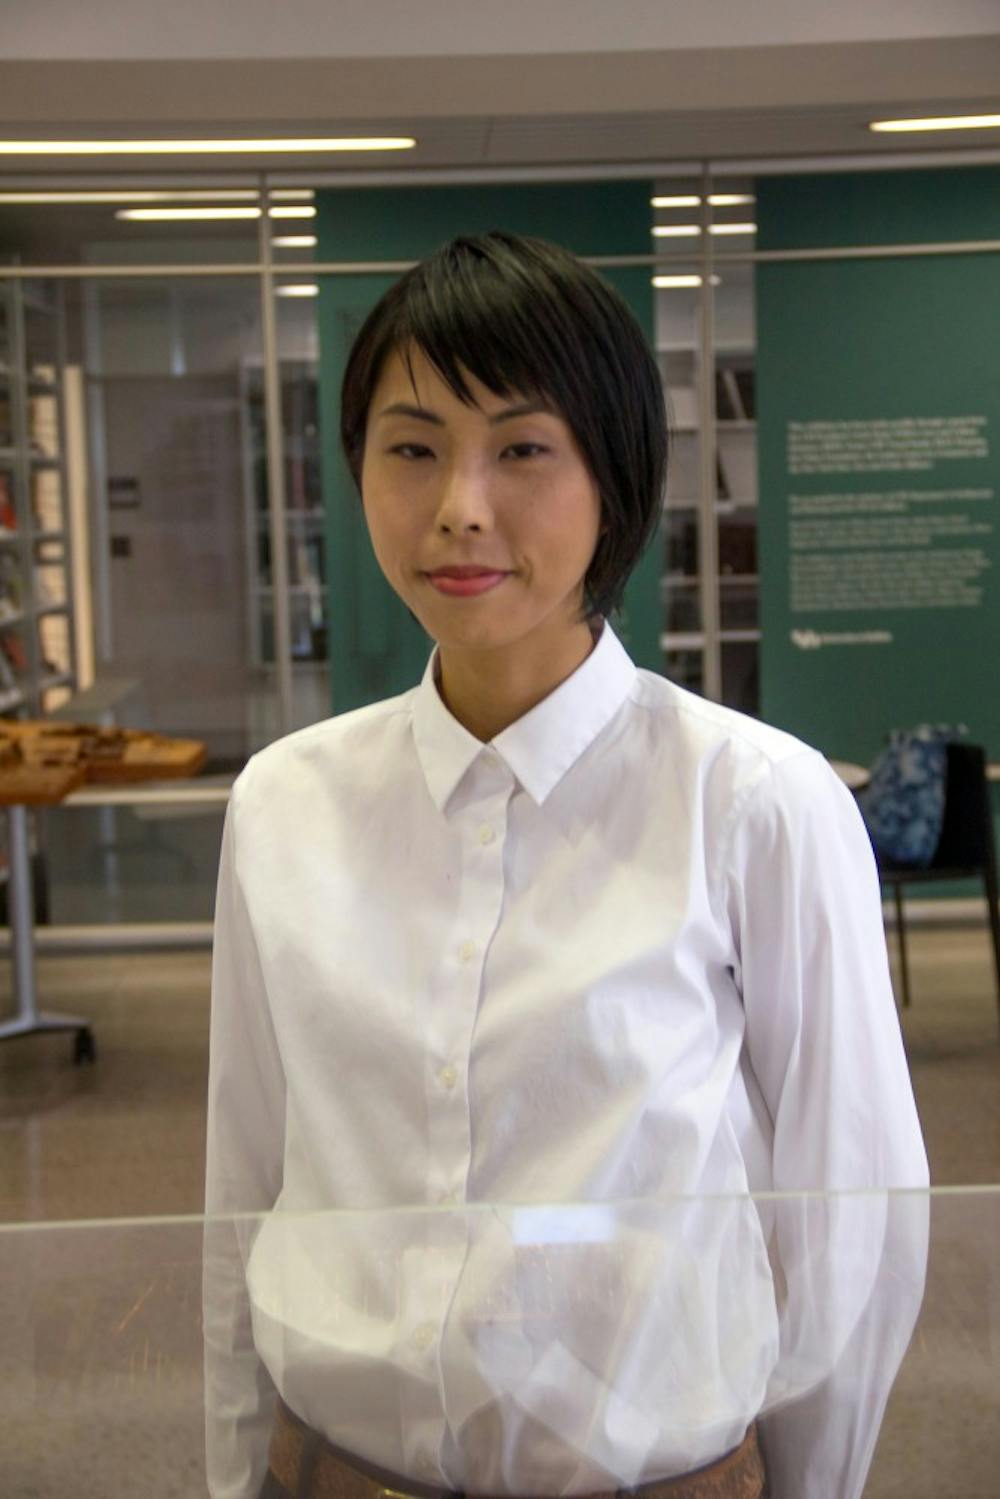 <p>Rima Yamazaki, a Japan-born and New York-based filmmaker, is an artist-in-residence this semester with the UB Creative Arts Initiative (CAI). Yamazaki, whose work has been featured around the world, will be filming architectural structures throughout the city of Buffalo for her upcoming project.</p>